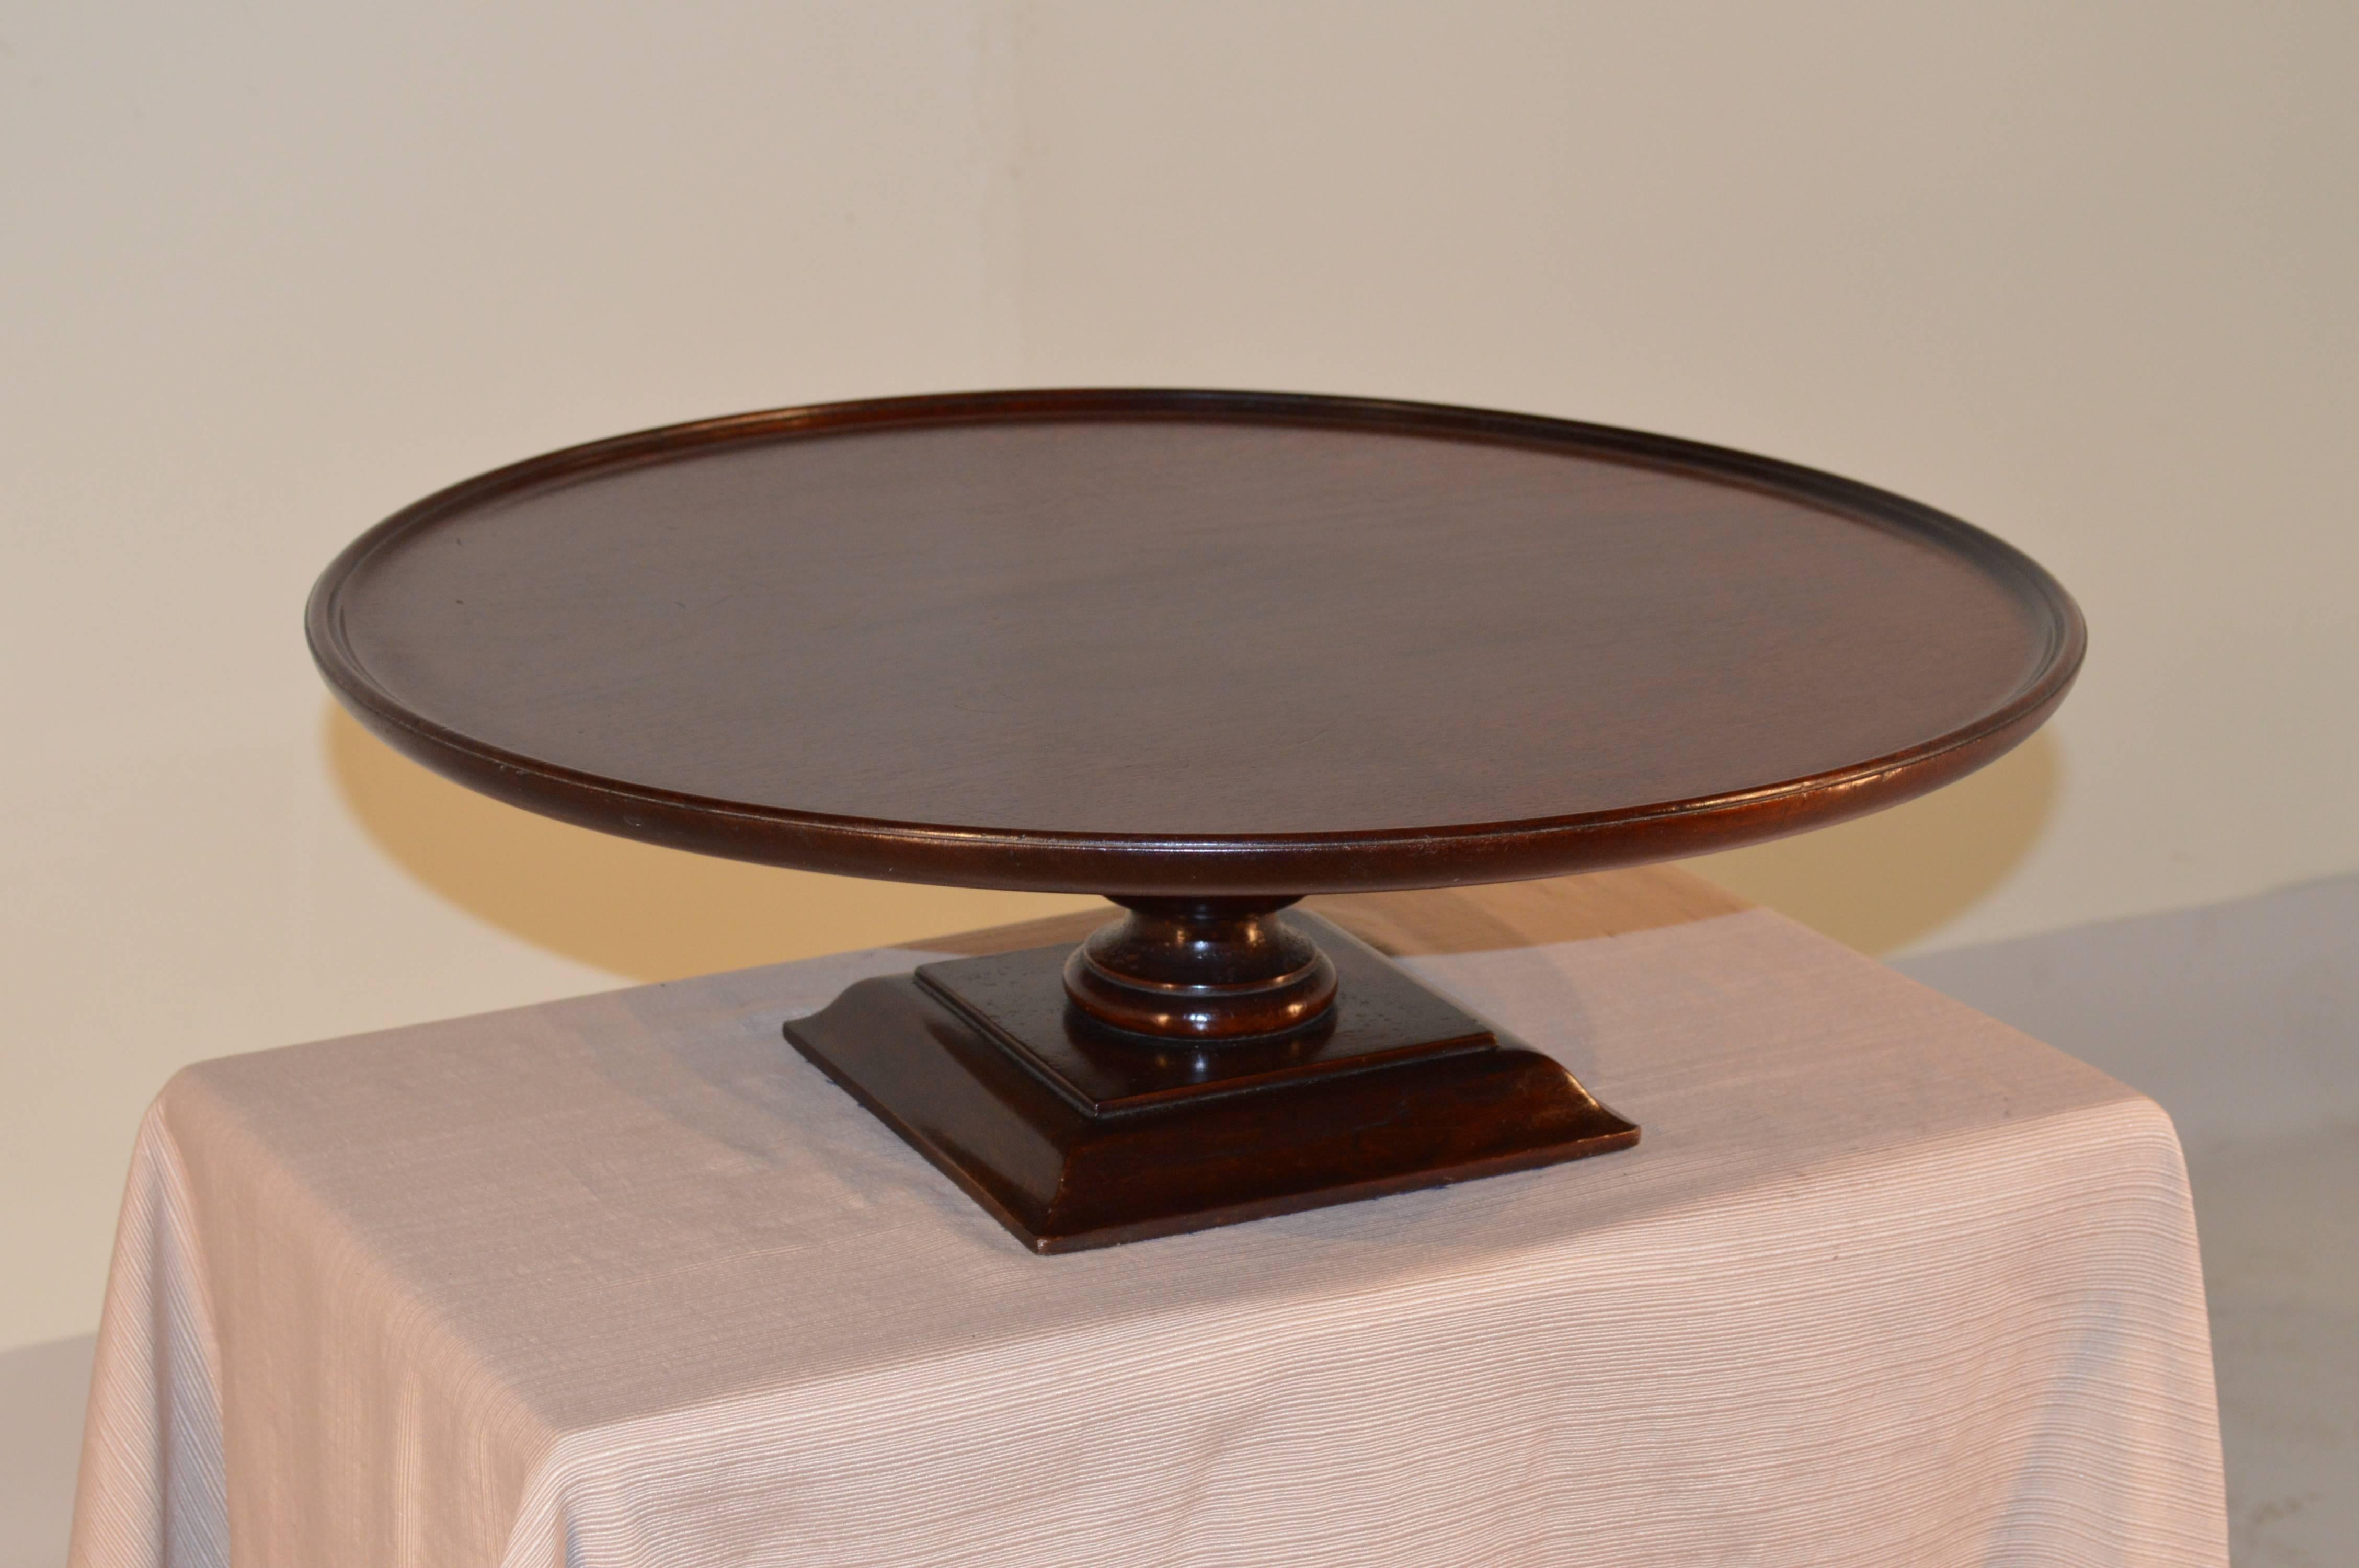 19th century English lazy Susan made from mahogany. The top is a turned dish top and follows down to a turned stem and a square base with molded edges. The contrast between the square base and round top is unusual and interesting.